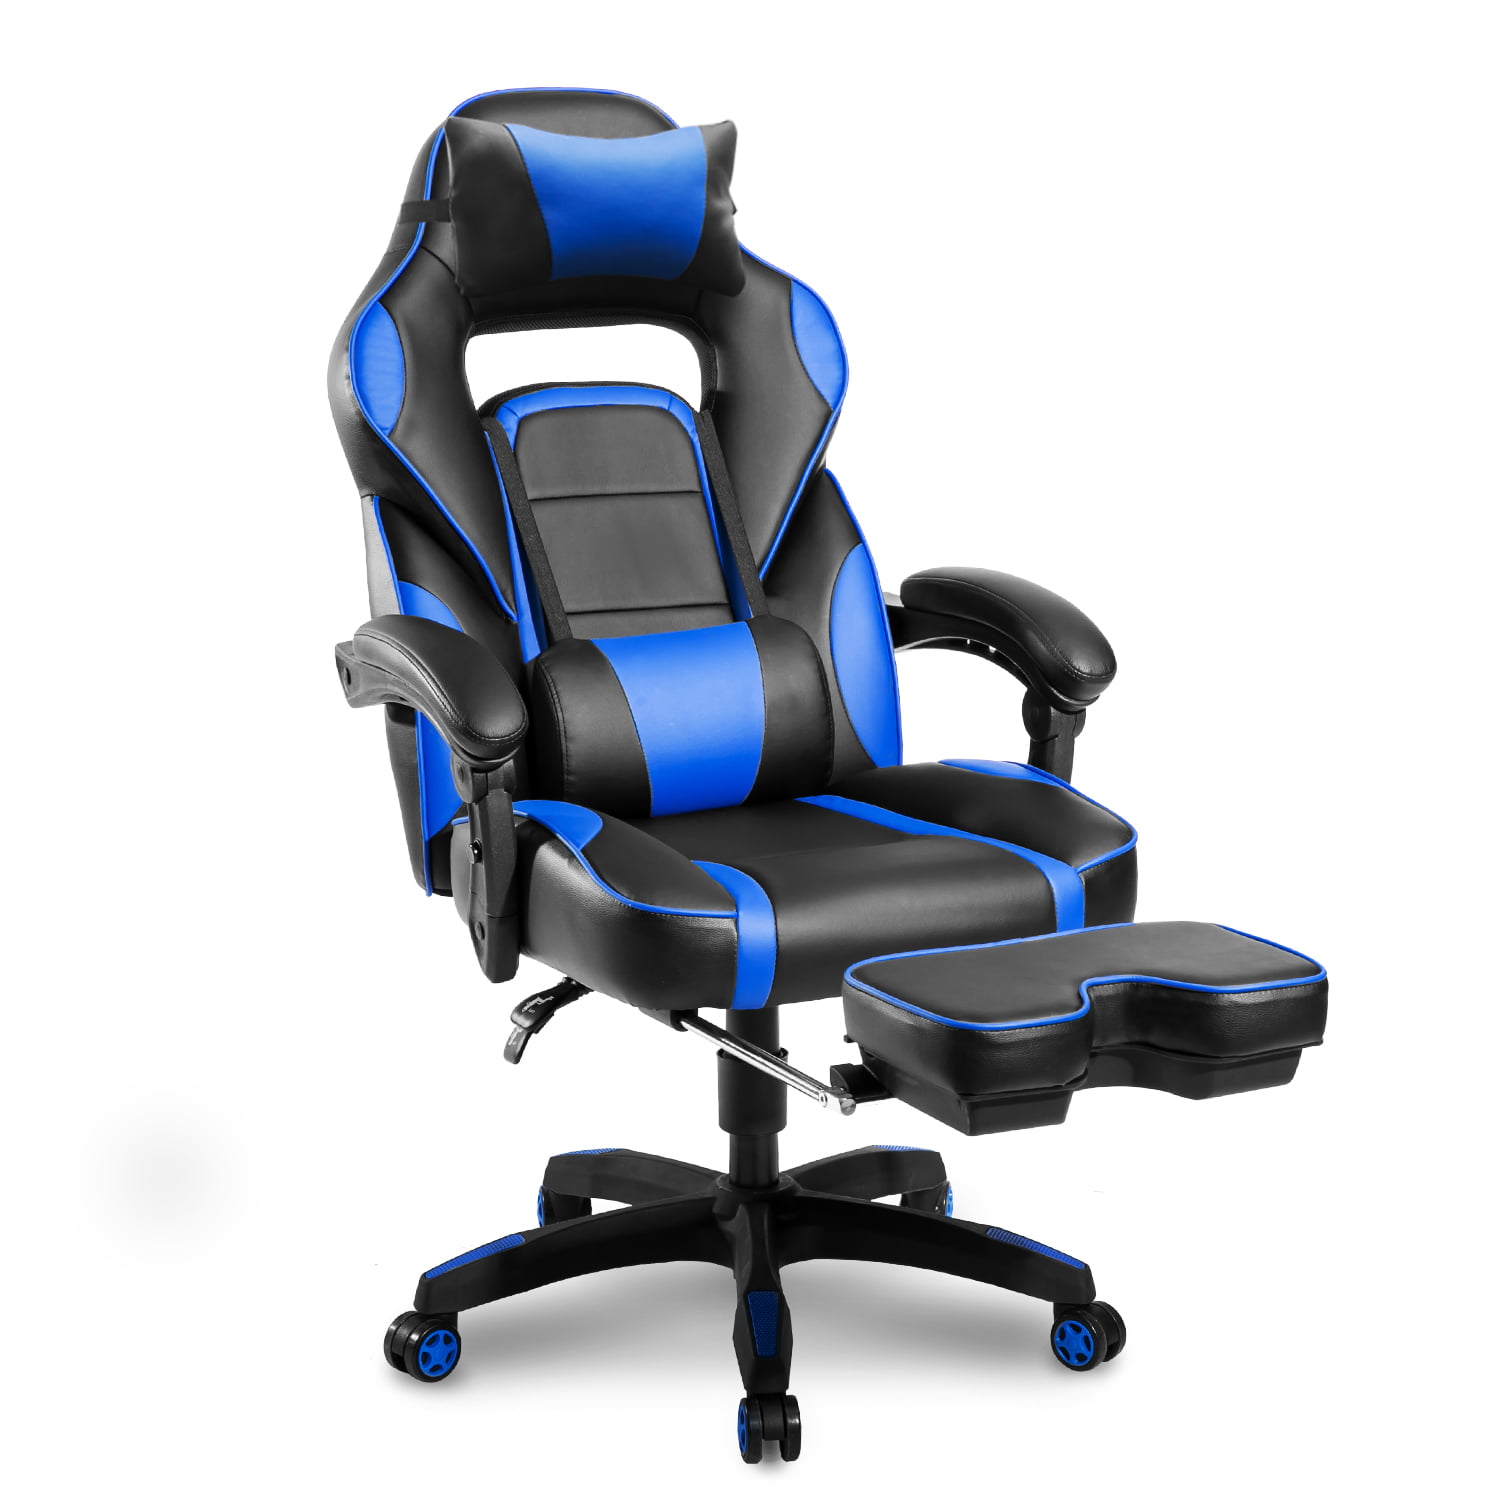 Details about   Ergonomic Leather Chair Racing Gaming Swivel Office Computer Desk Seat Recliner 